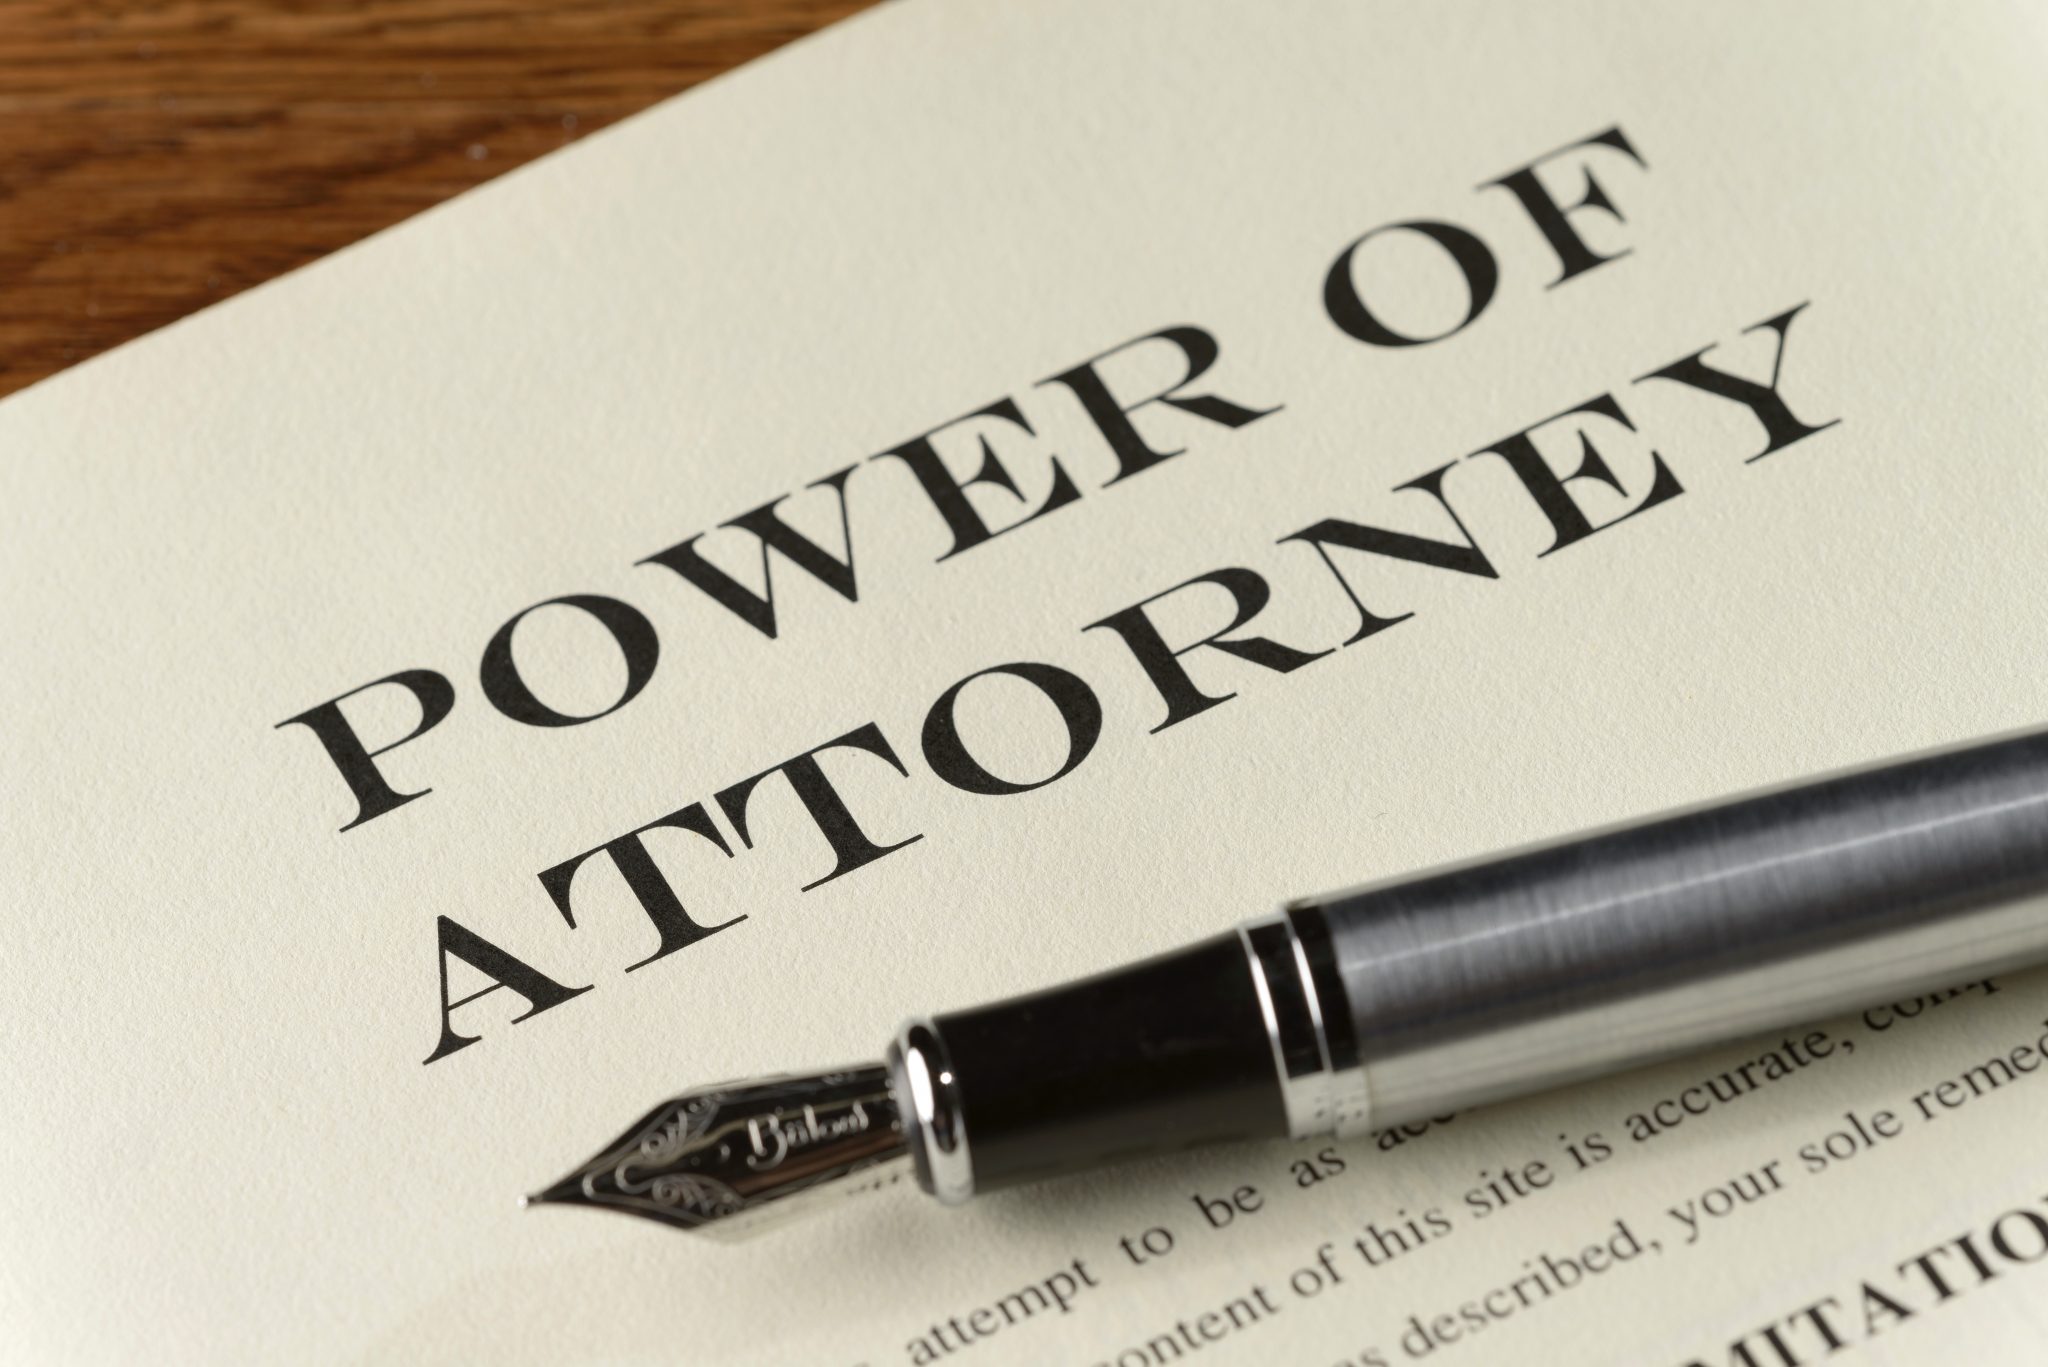 A power of attorney document on a desk with a pen.